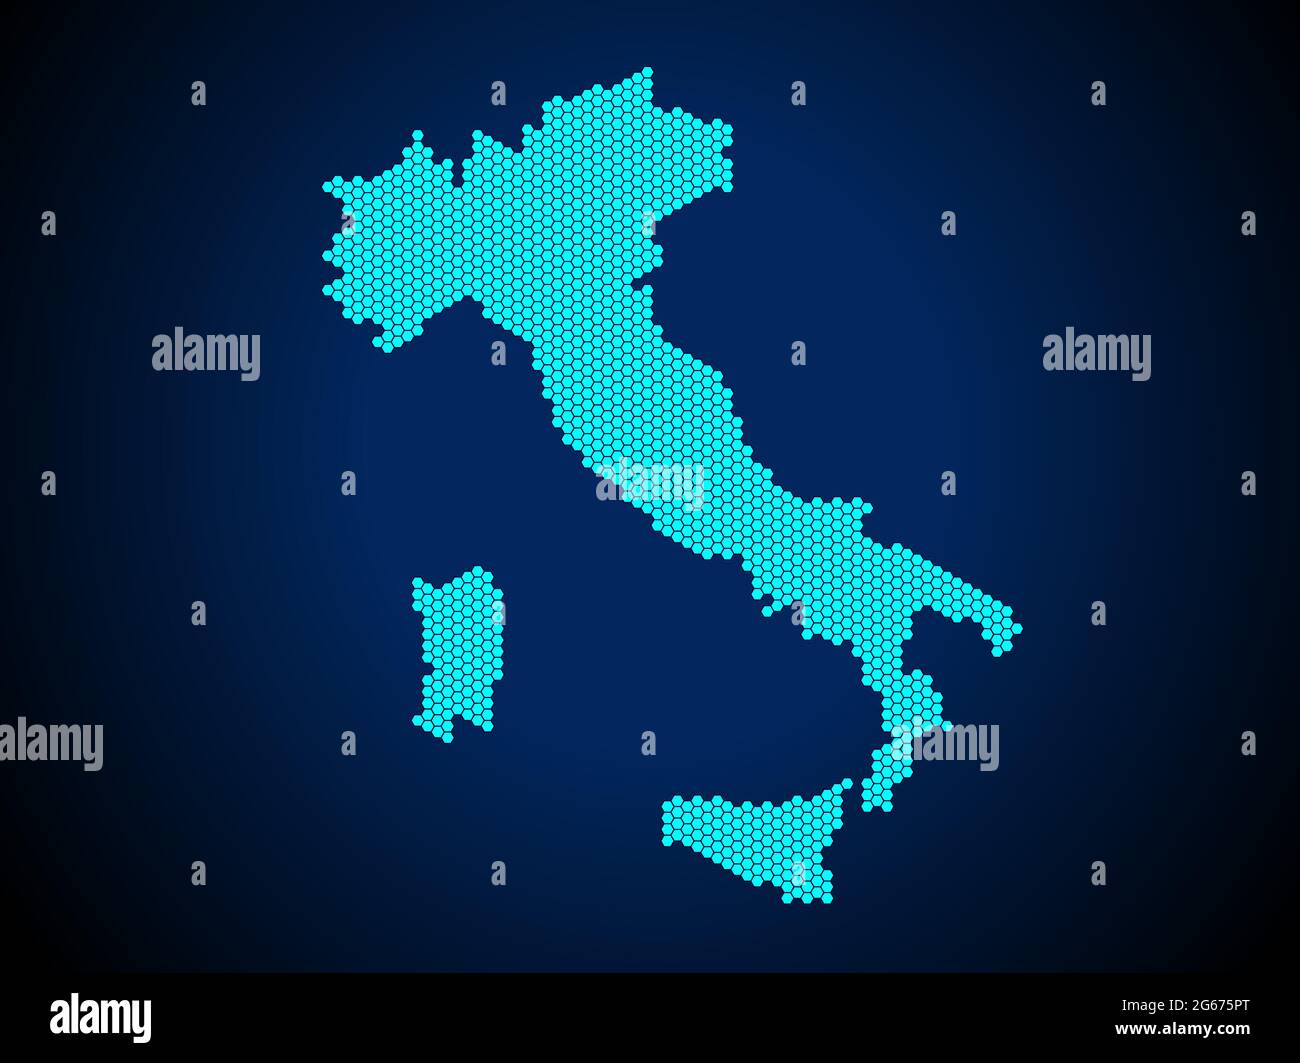 Honey Comb or Hexagon textured map of Italy Country isolated on dark blue background - vector illustration Stock Vector